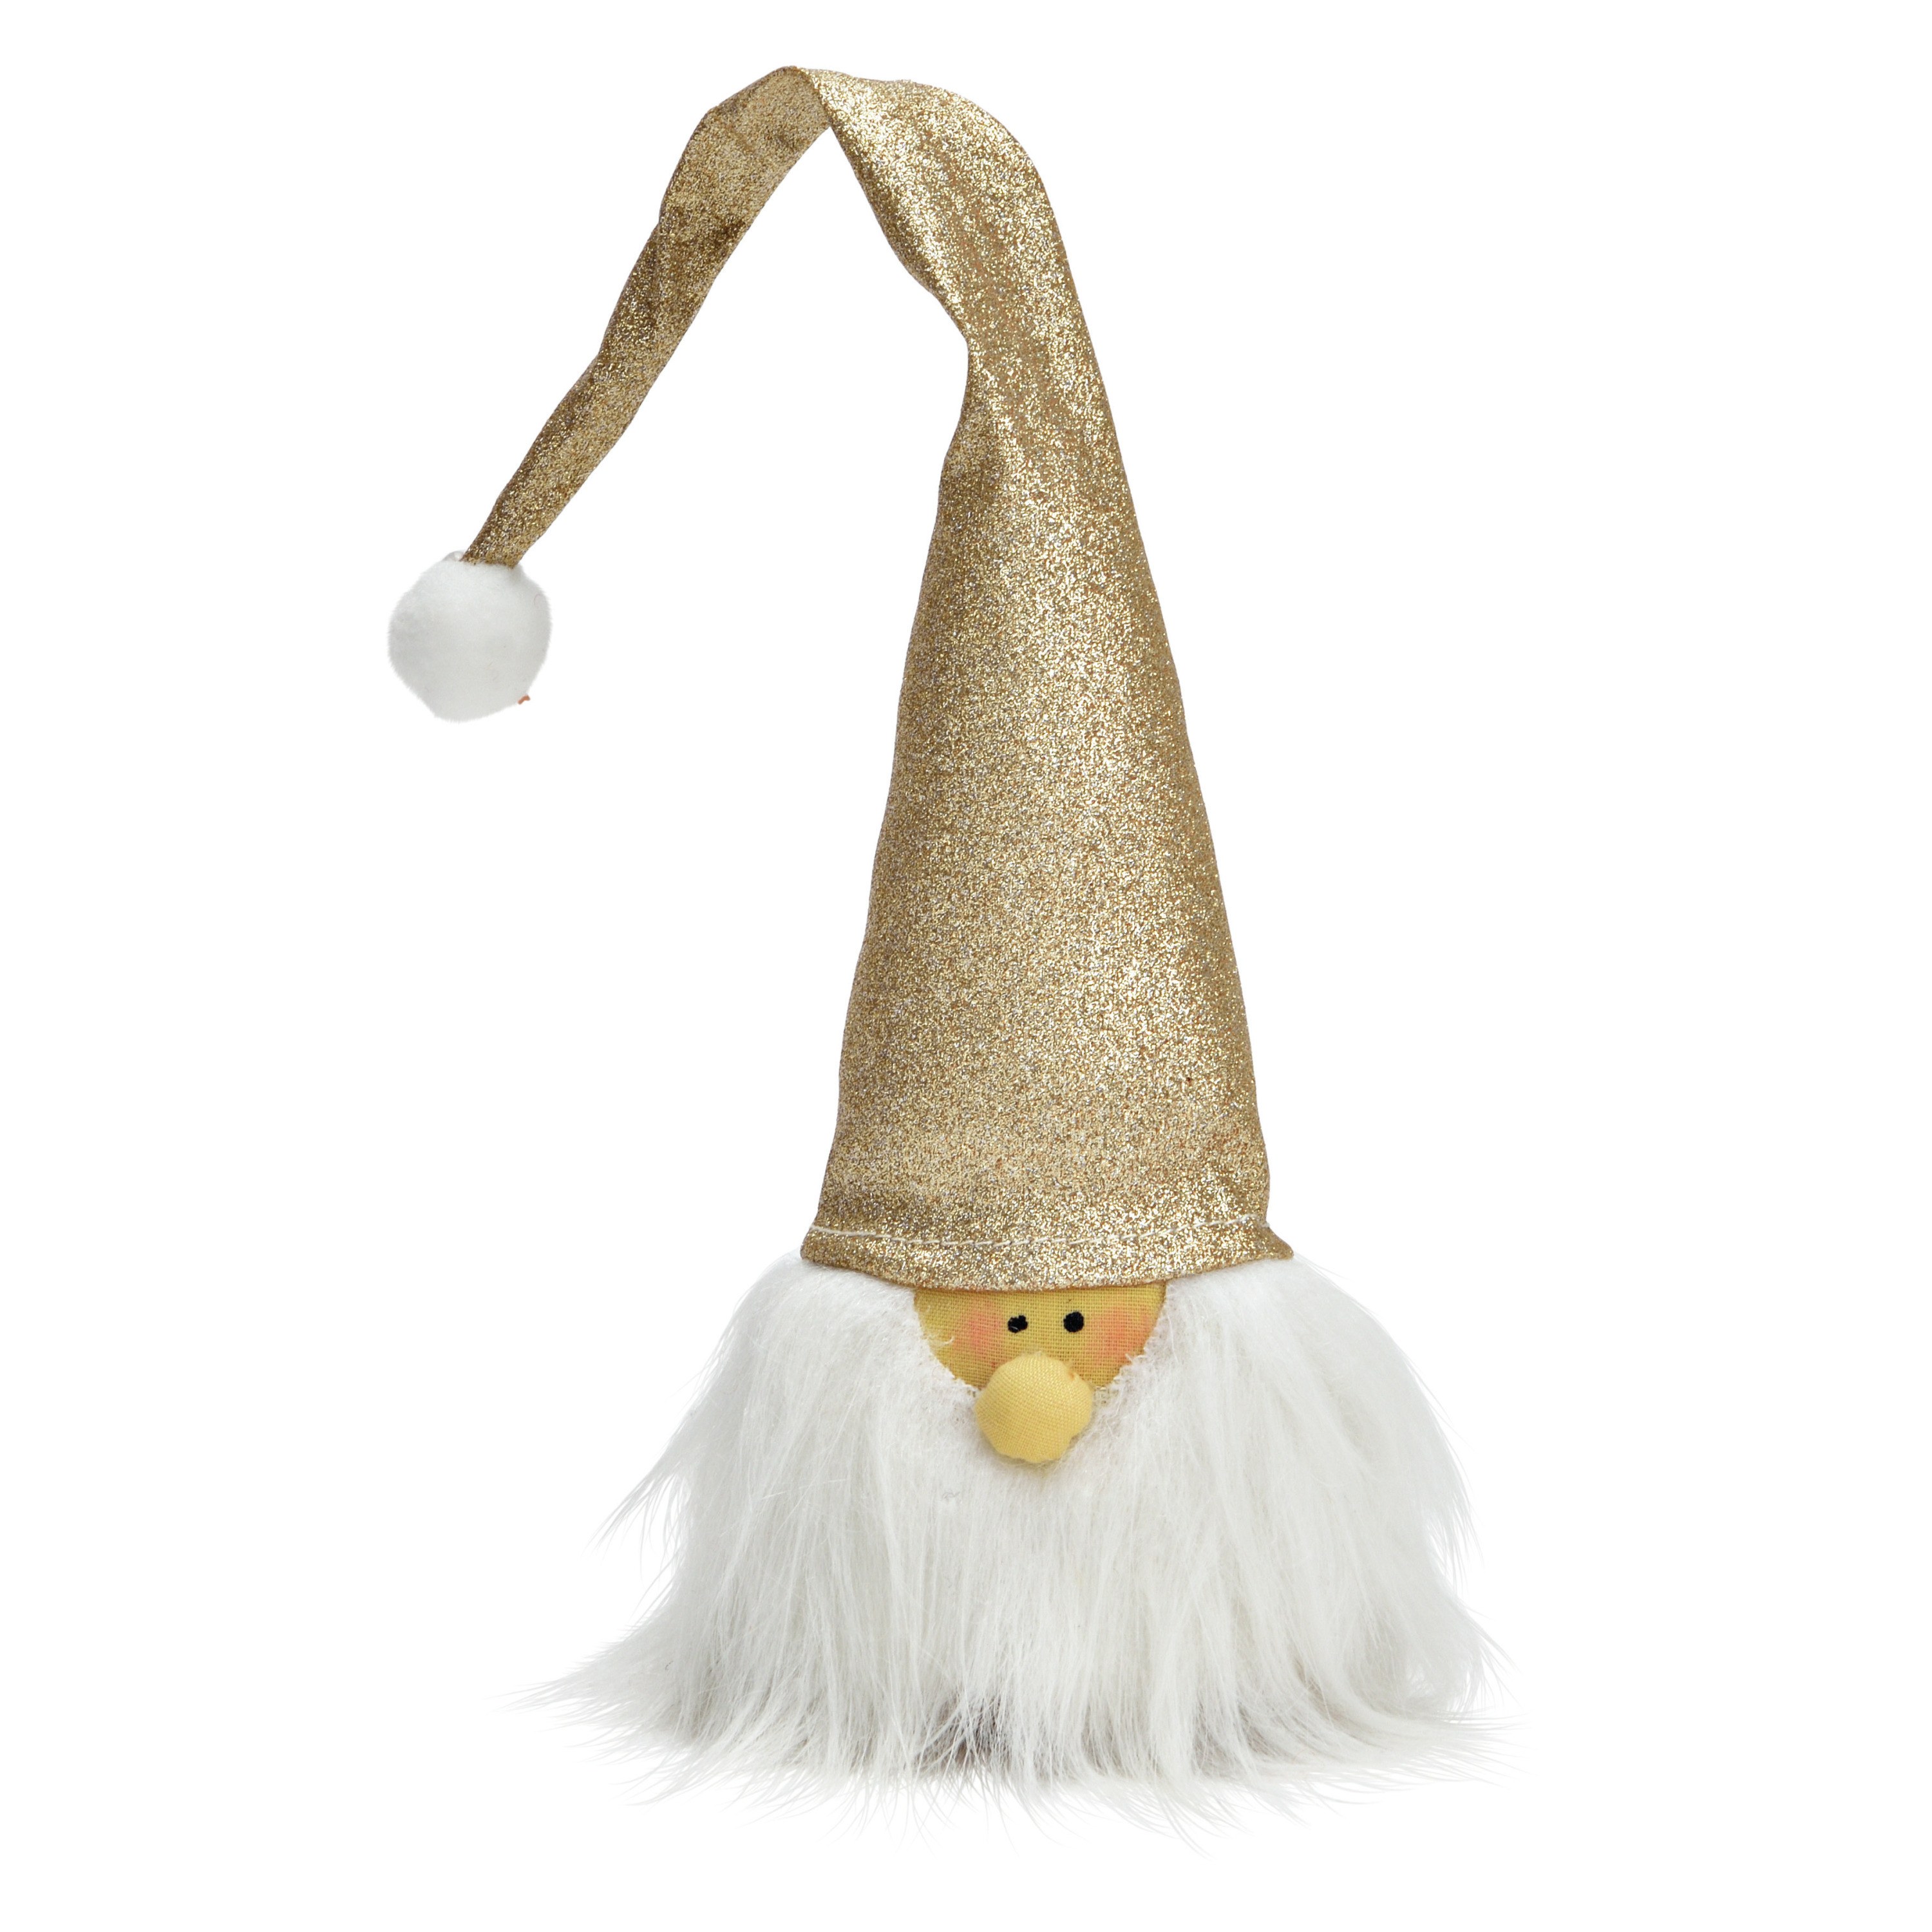 Pluche knuffel gnome-kabouter 29 cm champagne kerstman pop